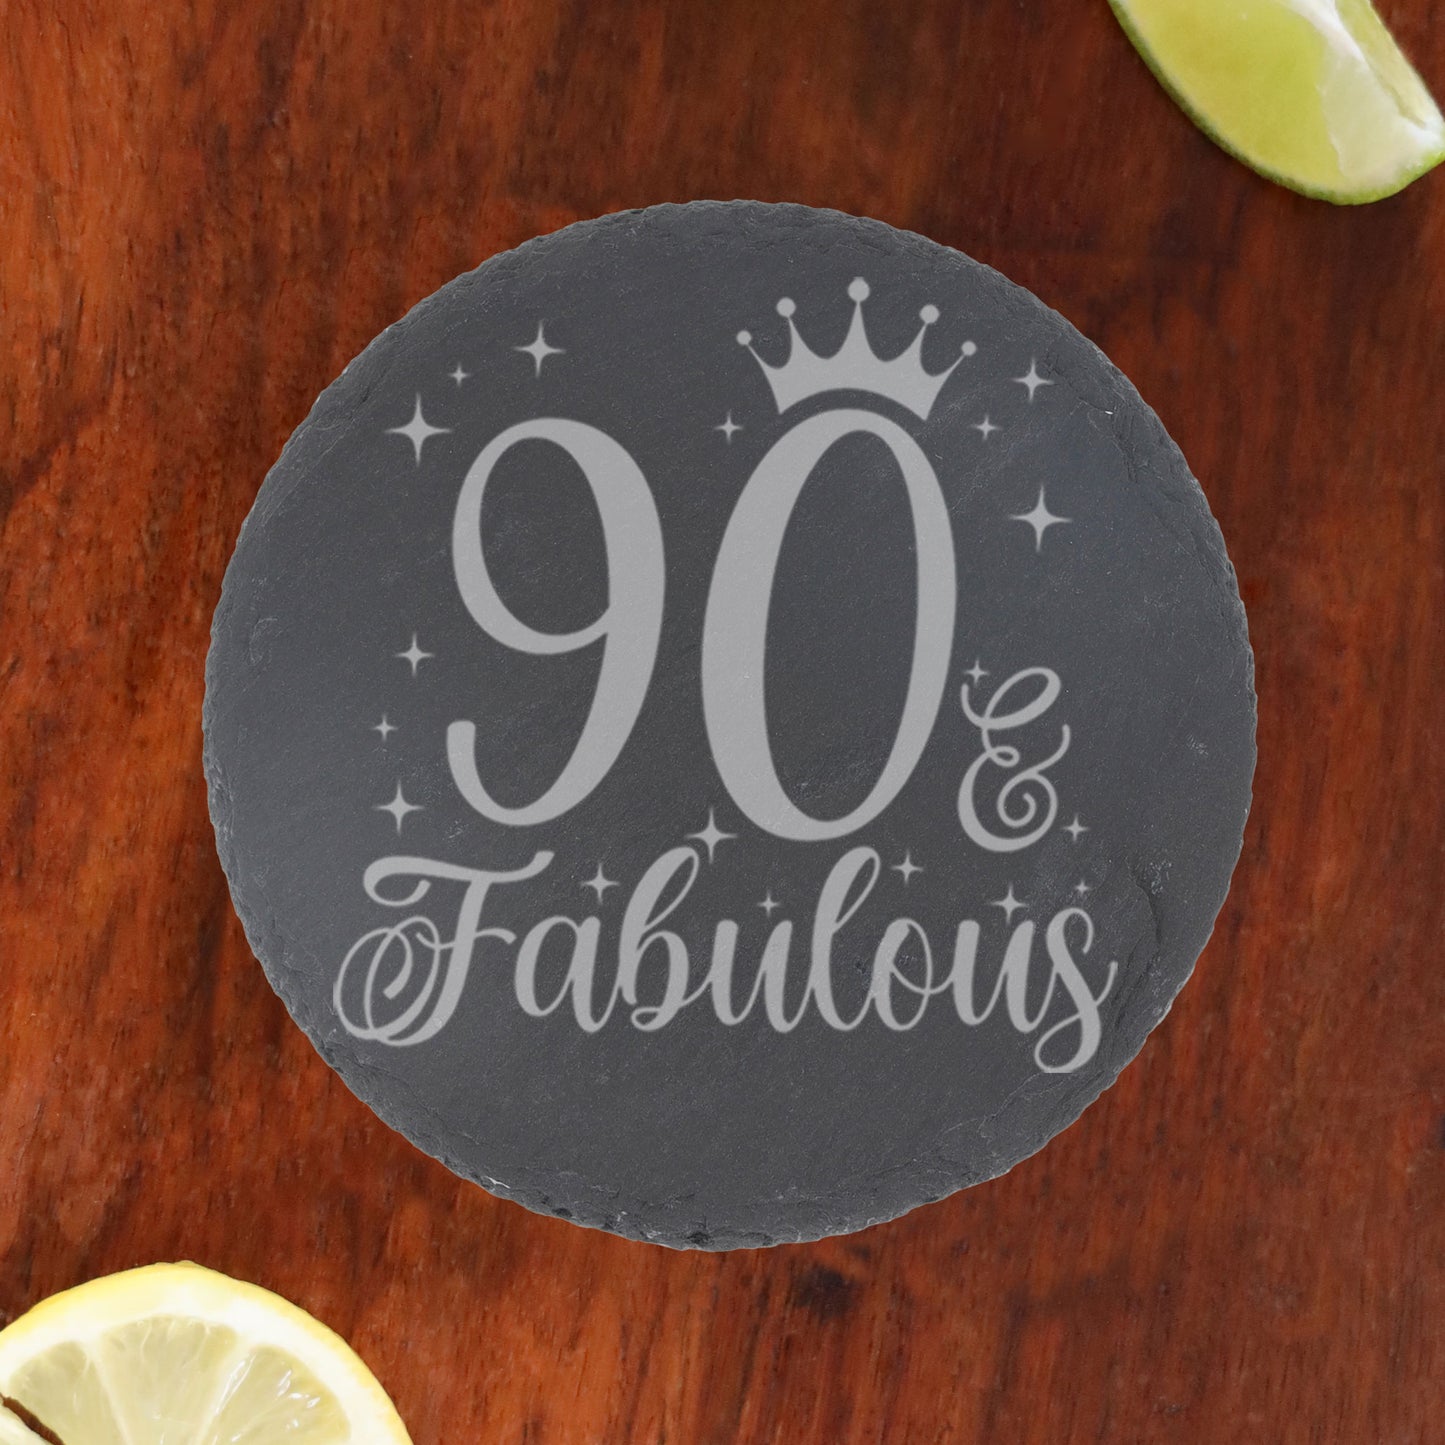 90 & Fabulous 90th Birthday Gift Engraved Wine Glass and/or Coaster Set  - Always Looking Good - Round Coaster Only  